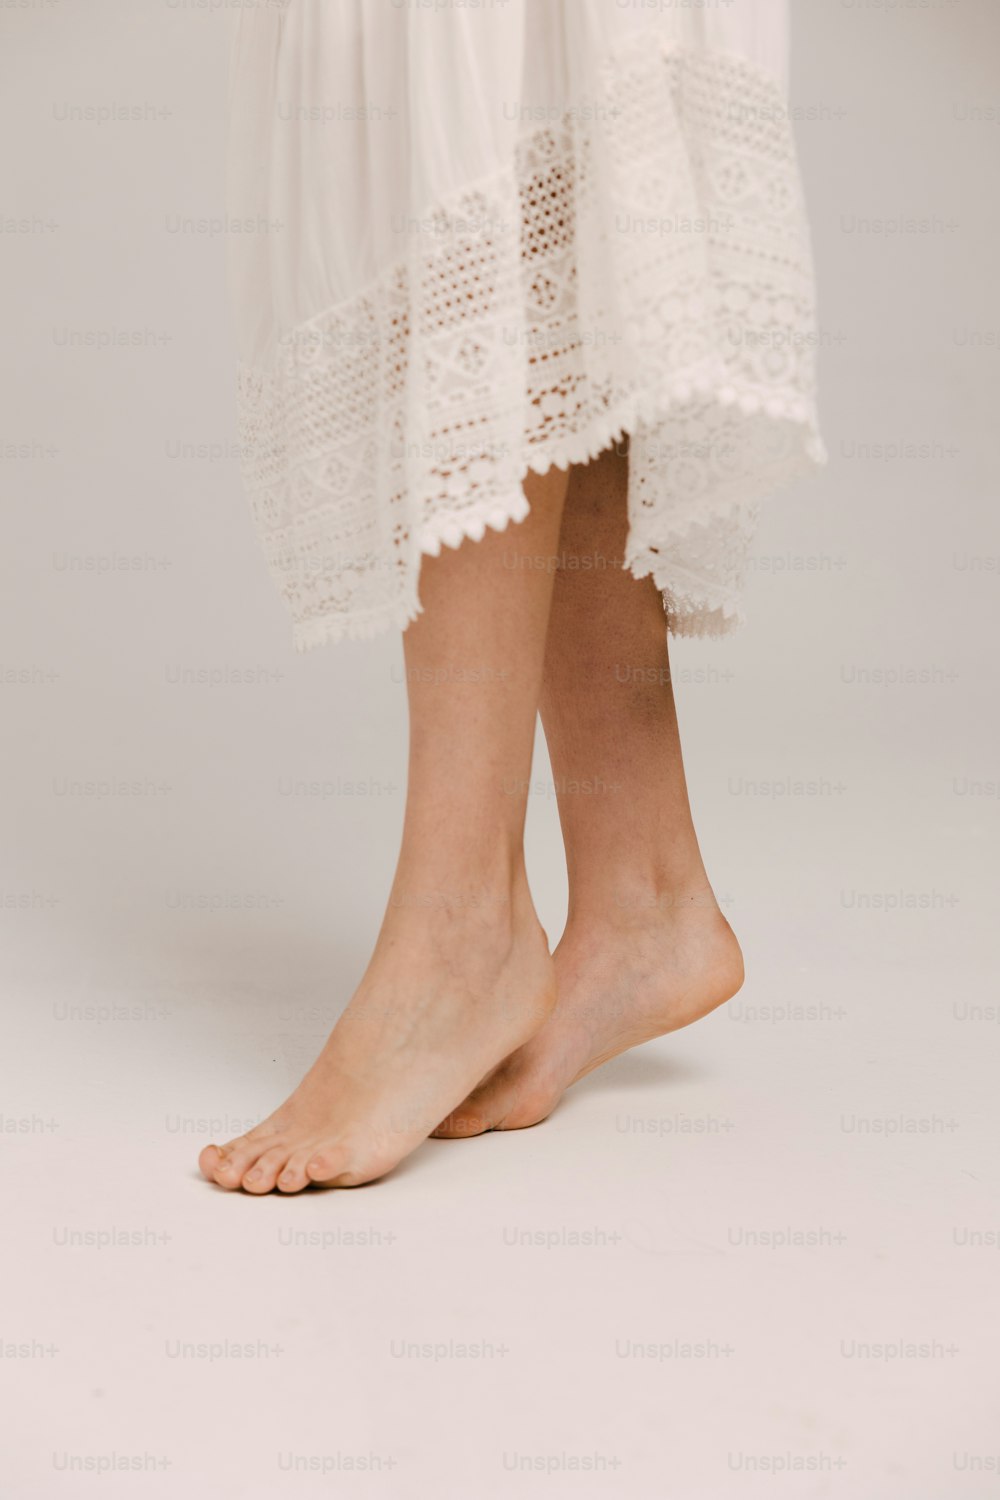 a close up of a person's legs wearing a white dress